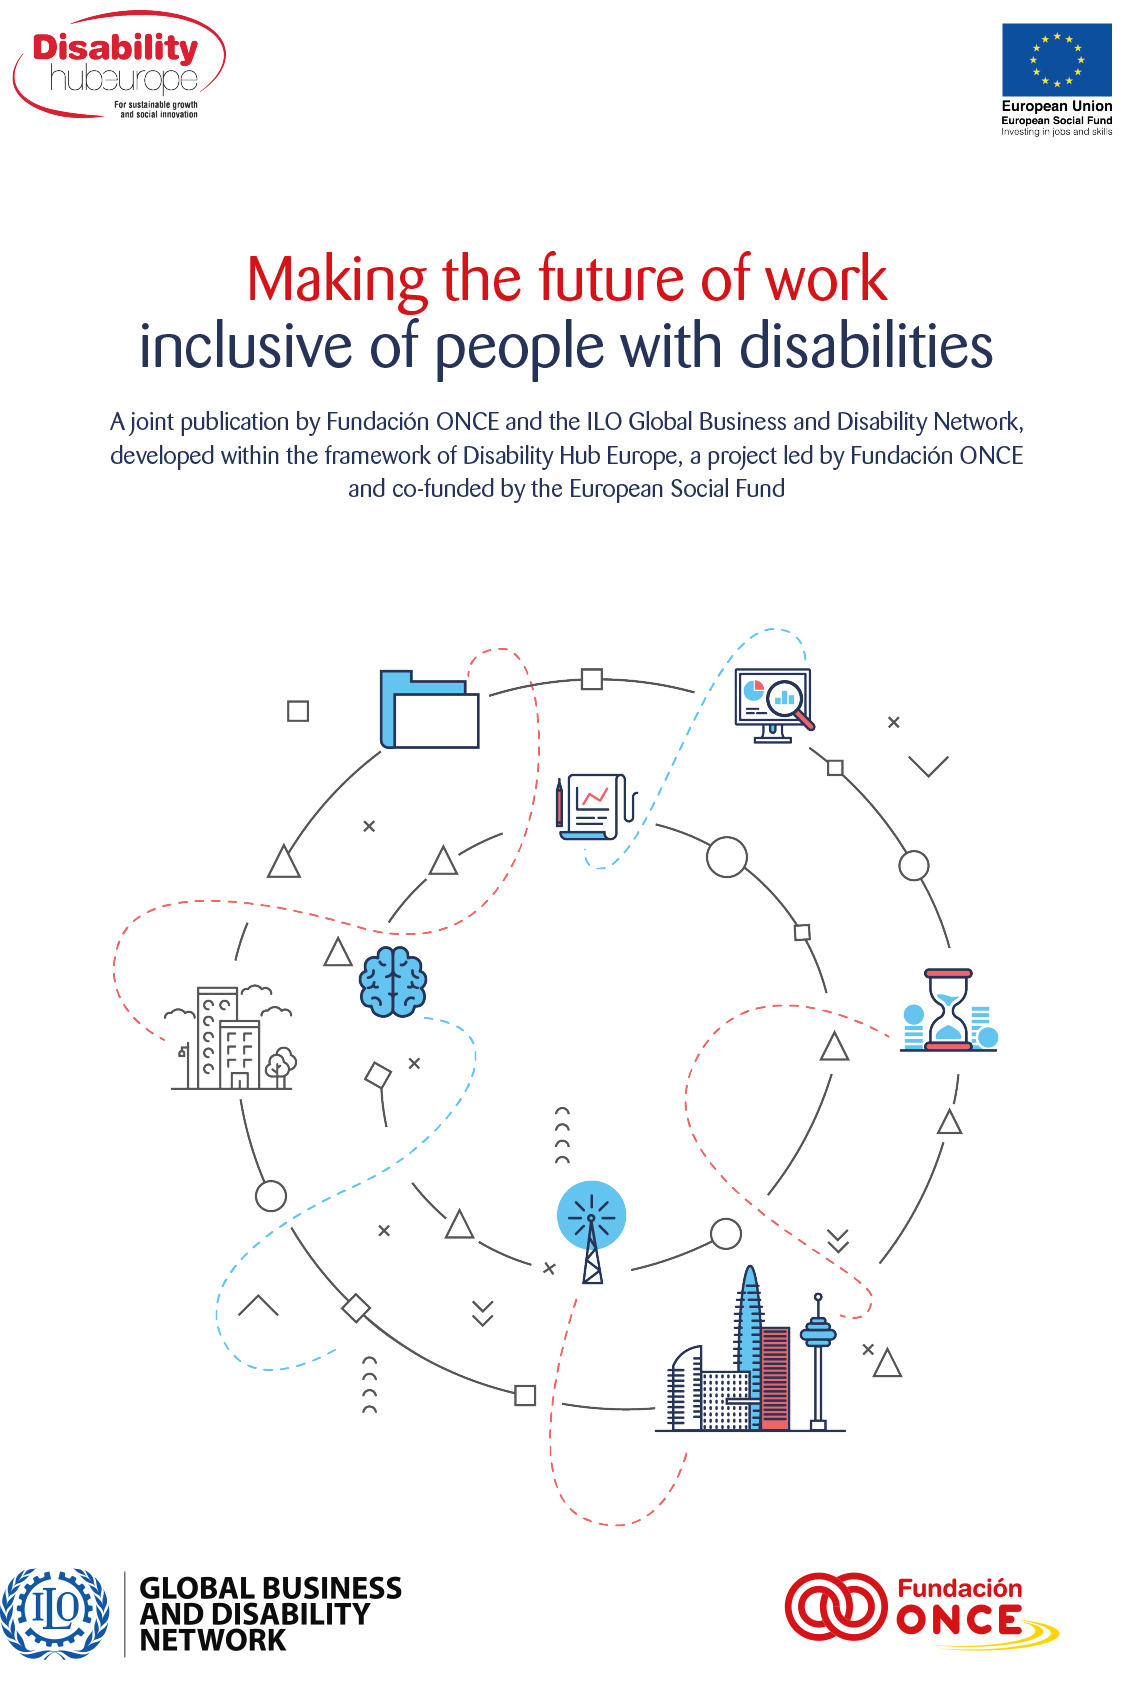 Making the future of work inclusive of people with disabilities